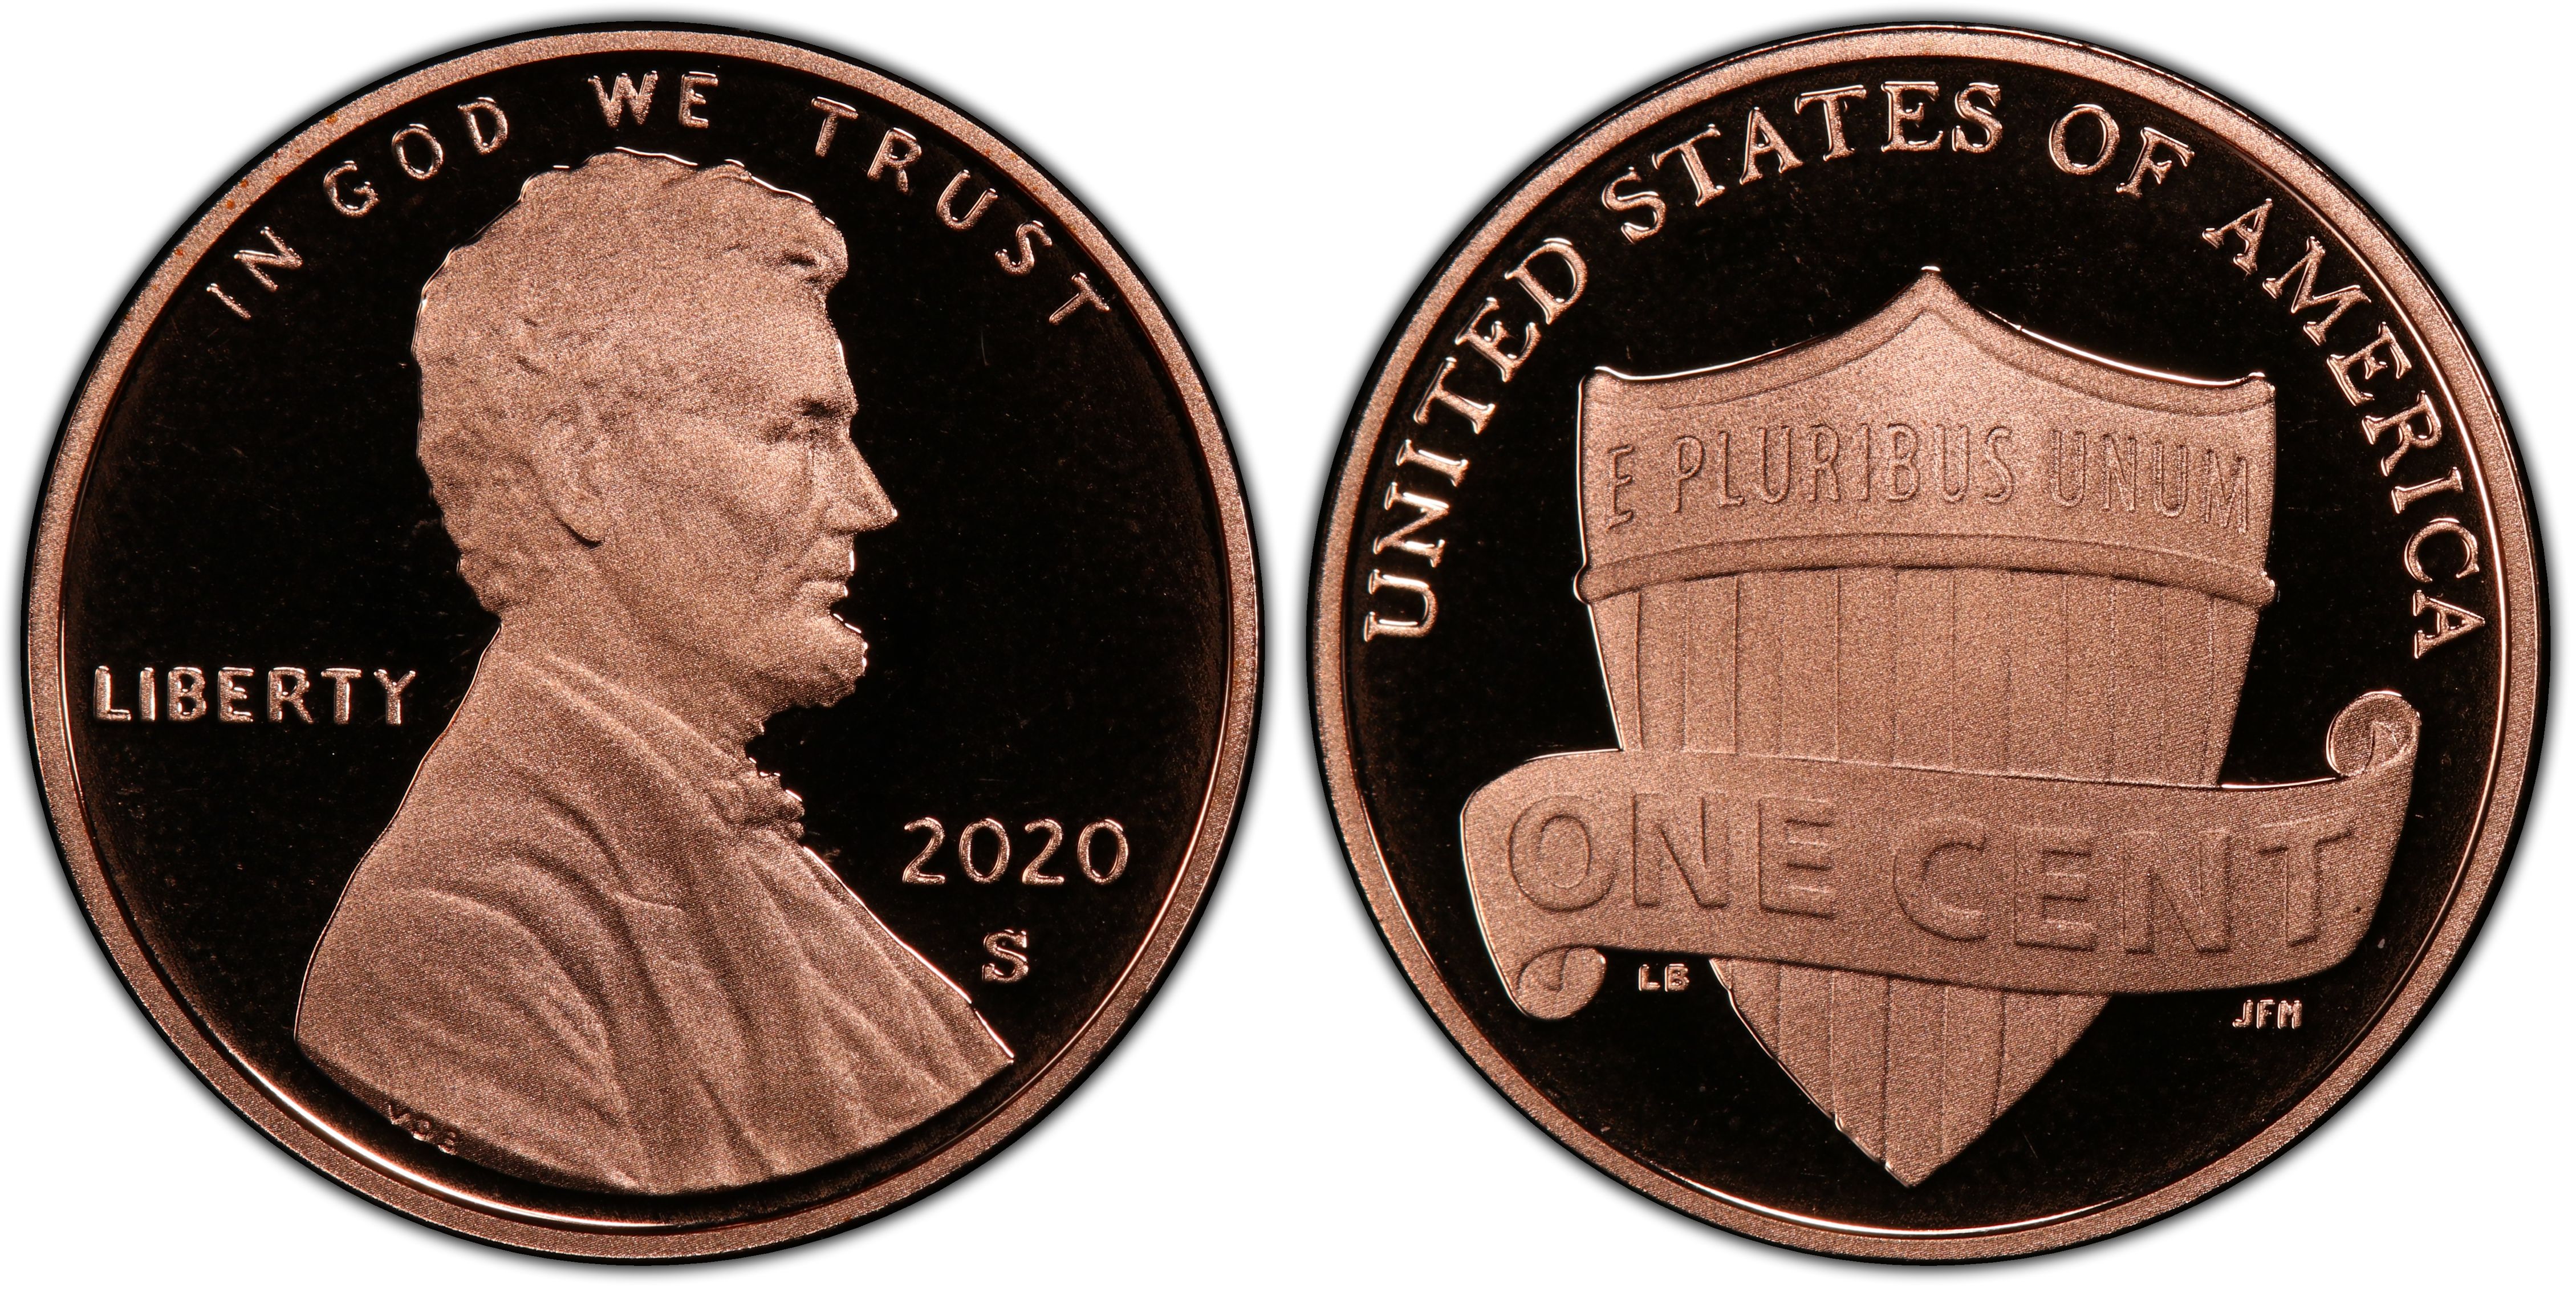 Details about   1995-S Proof Lincoln Cent GEM Coin New DCAM Penny from Proof Set Free Shipping! 